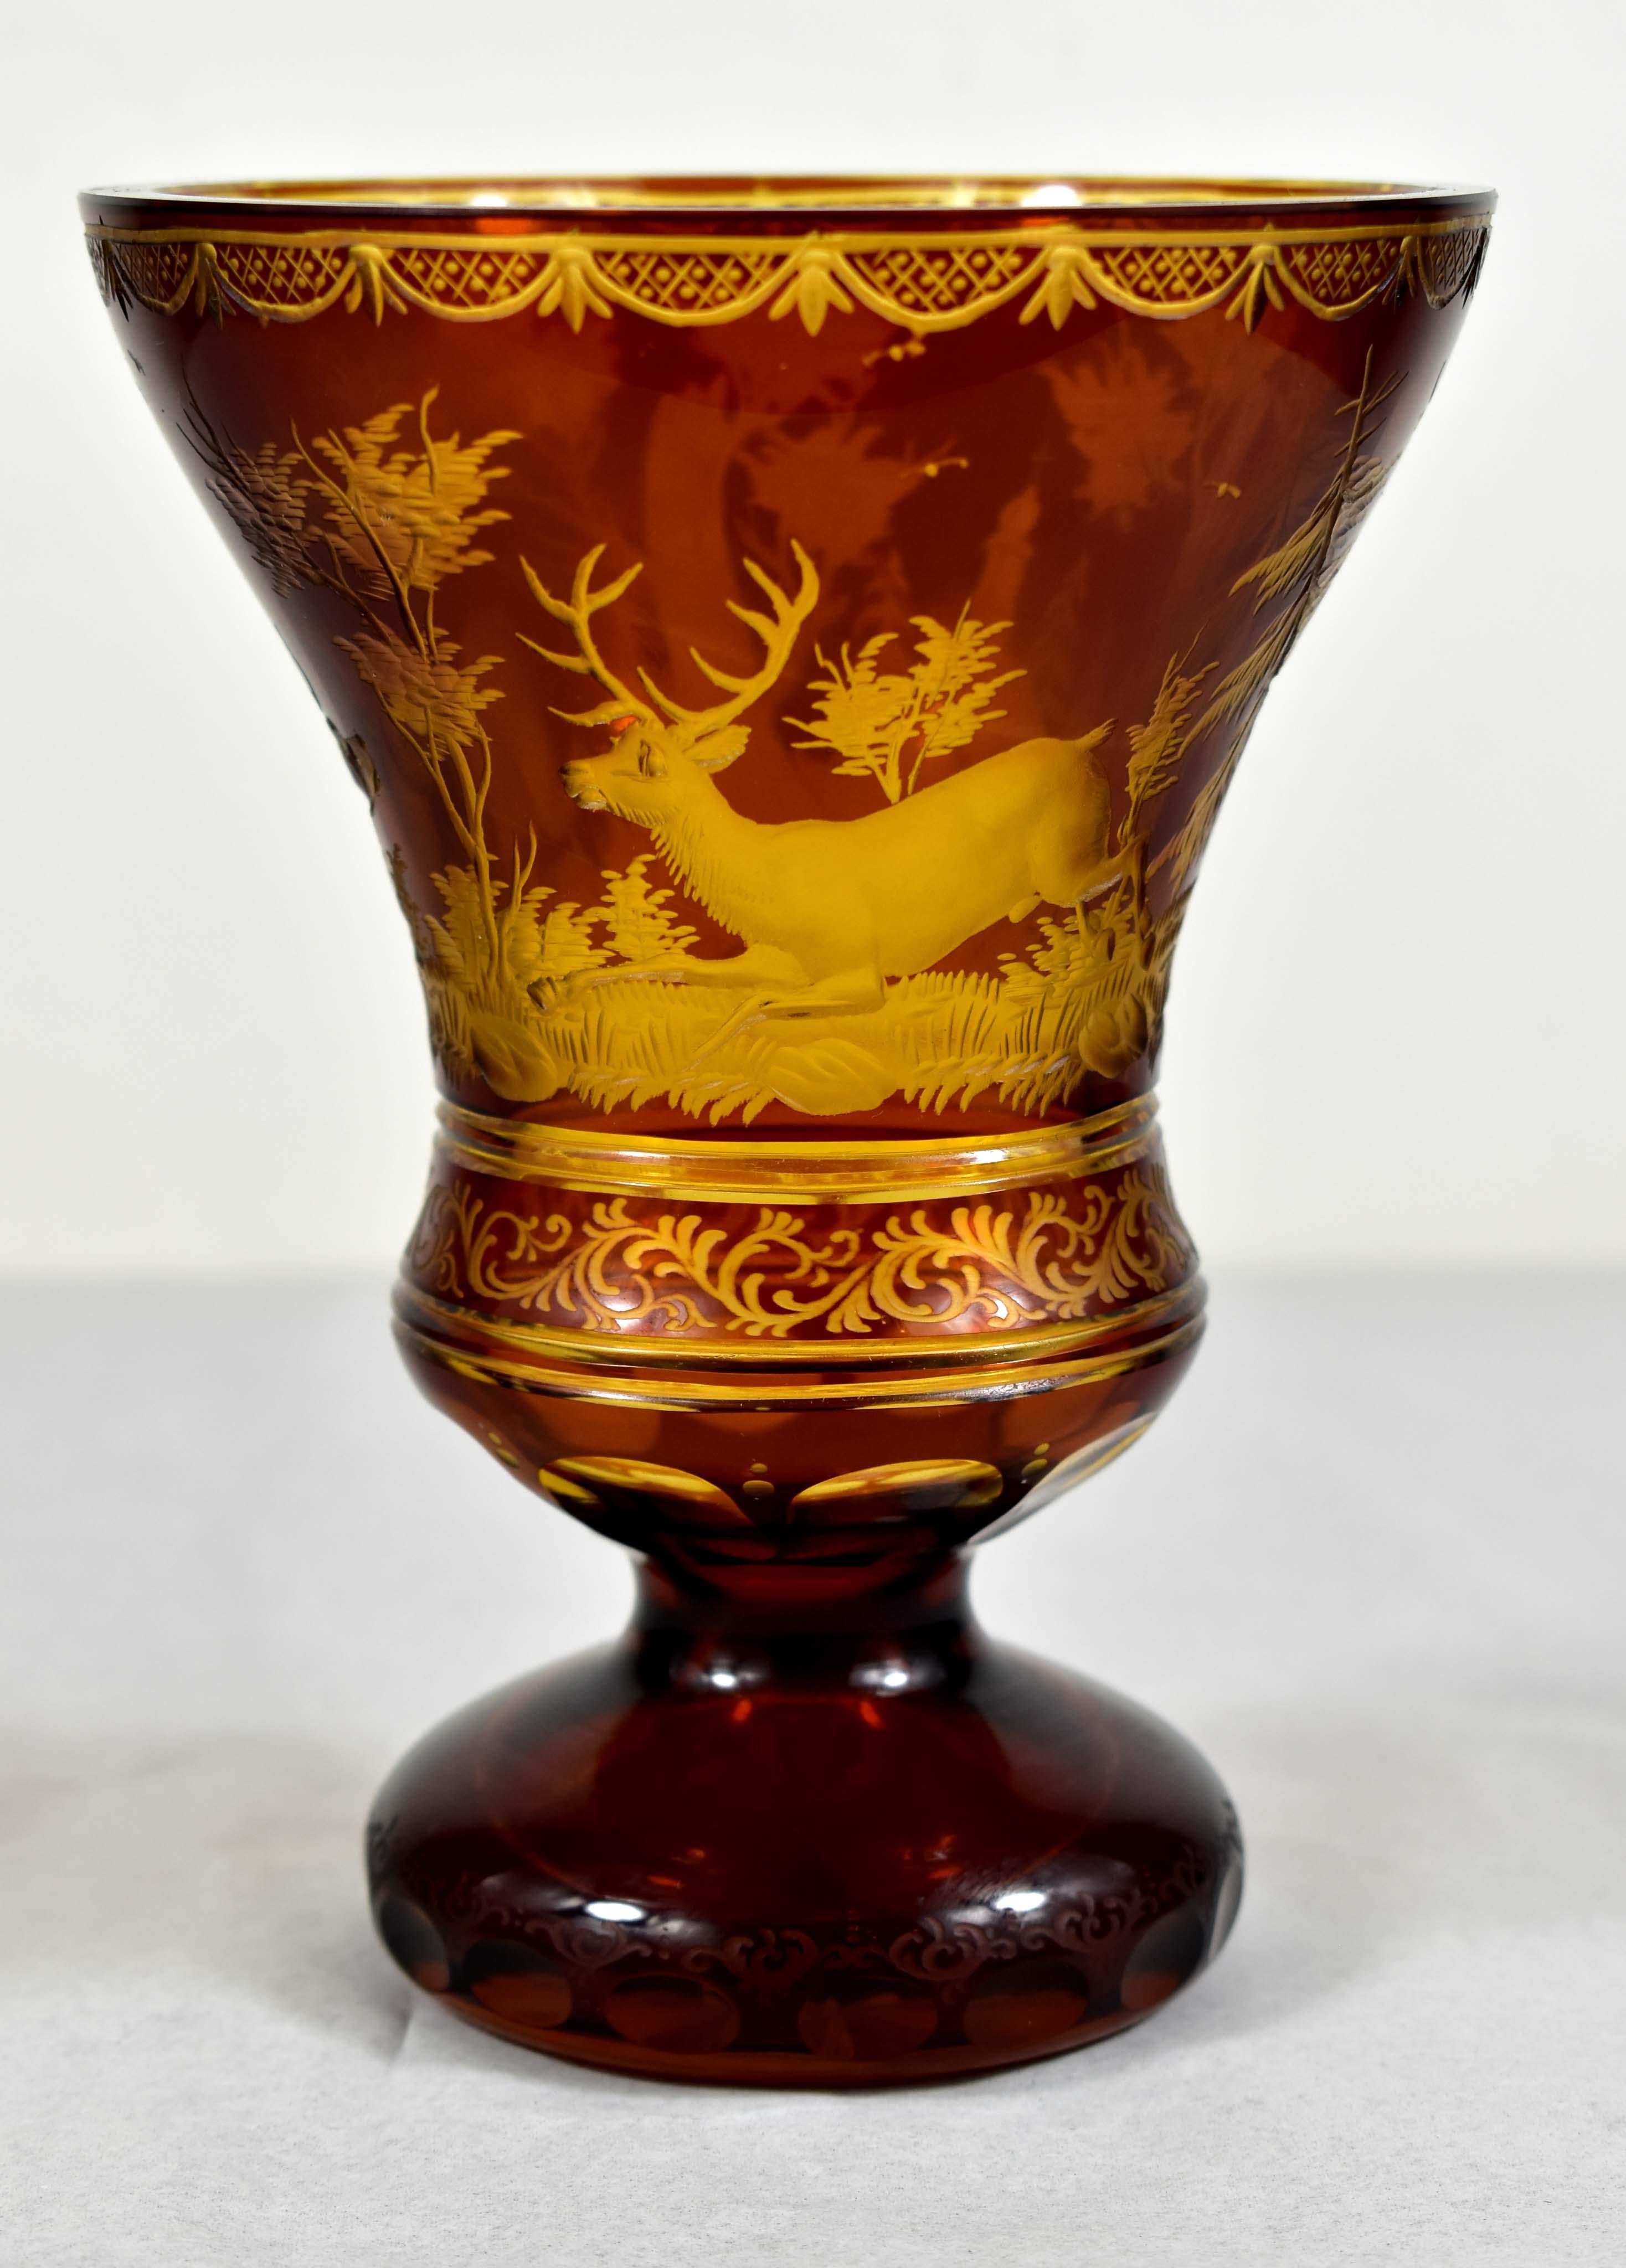 Beautiful cut, engraved amber glass goblet with yellow glaze. The engraving is a deer hunting motif with architecture in the background. All completed with an ornamental engraving. A very typical and popular 19th century motif from which this motif